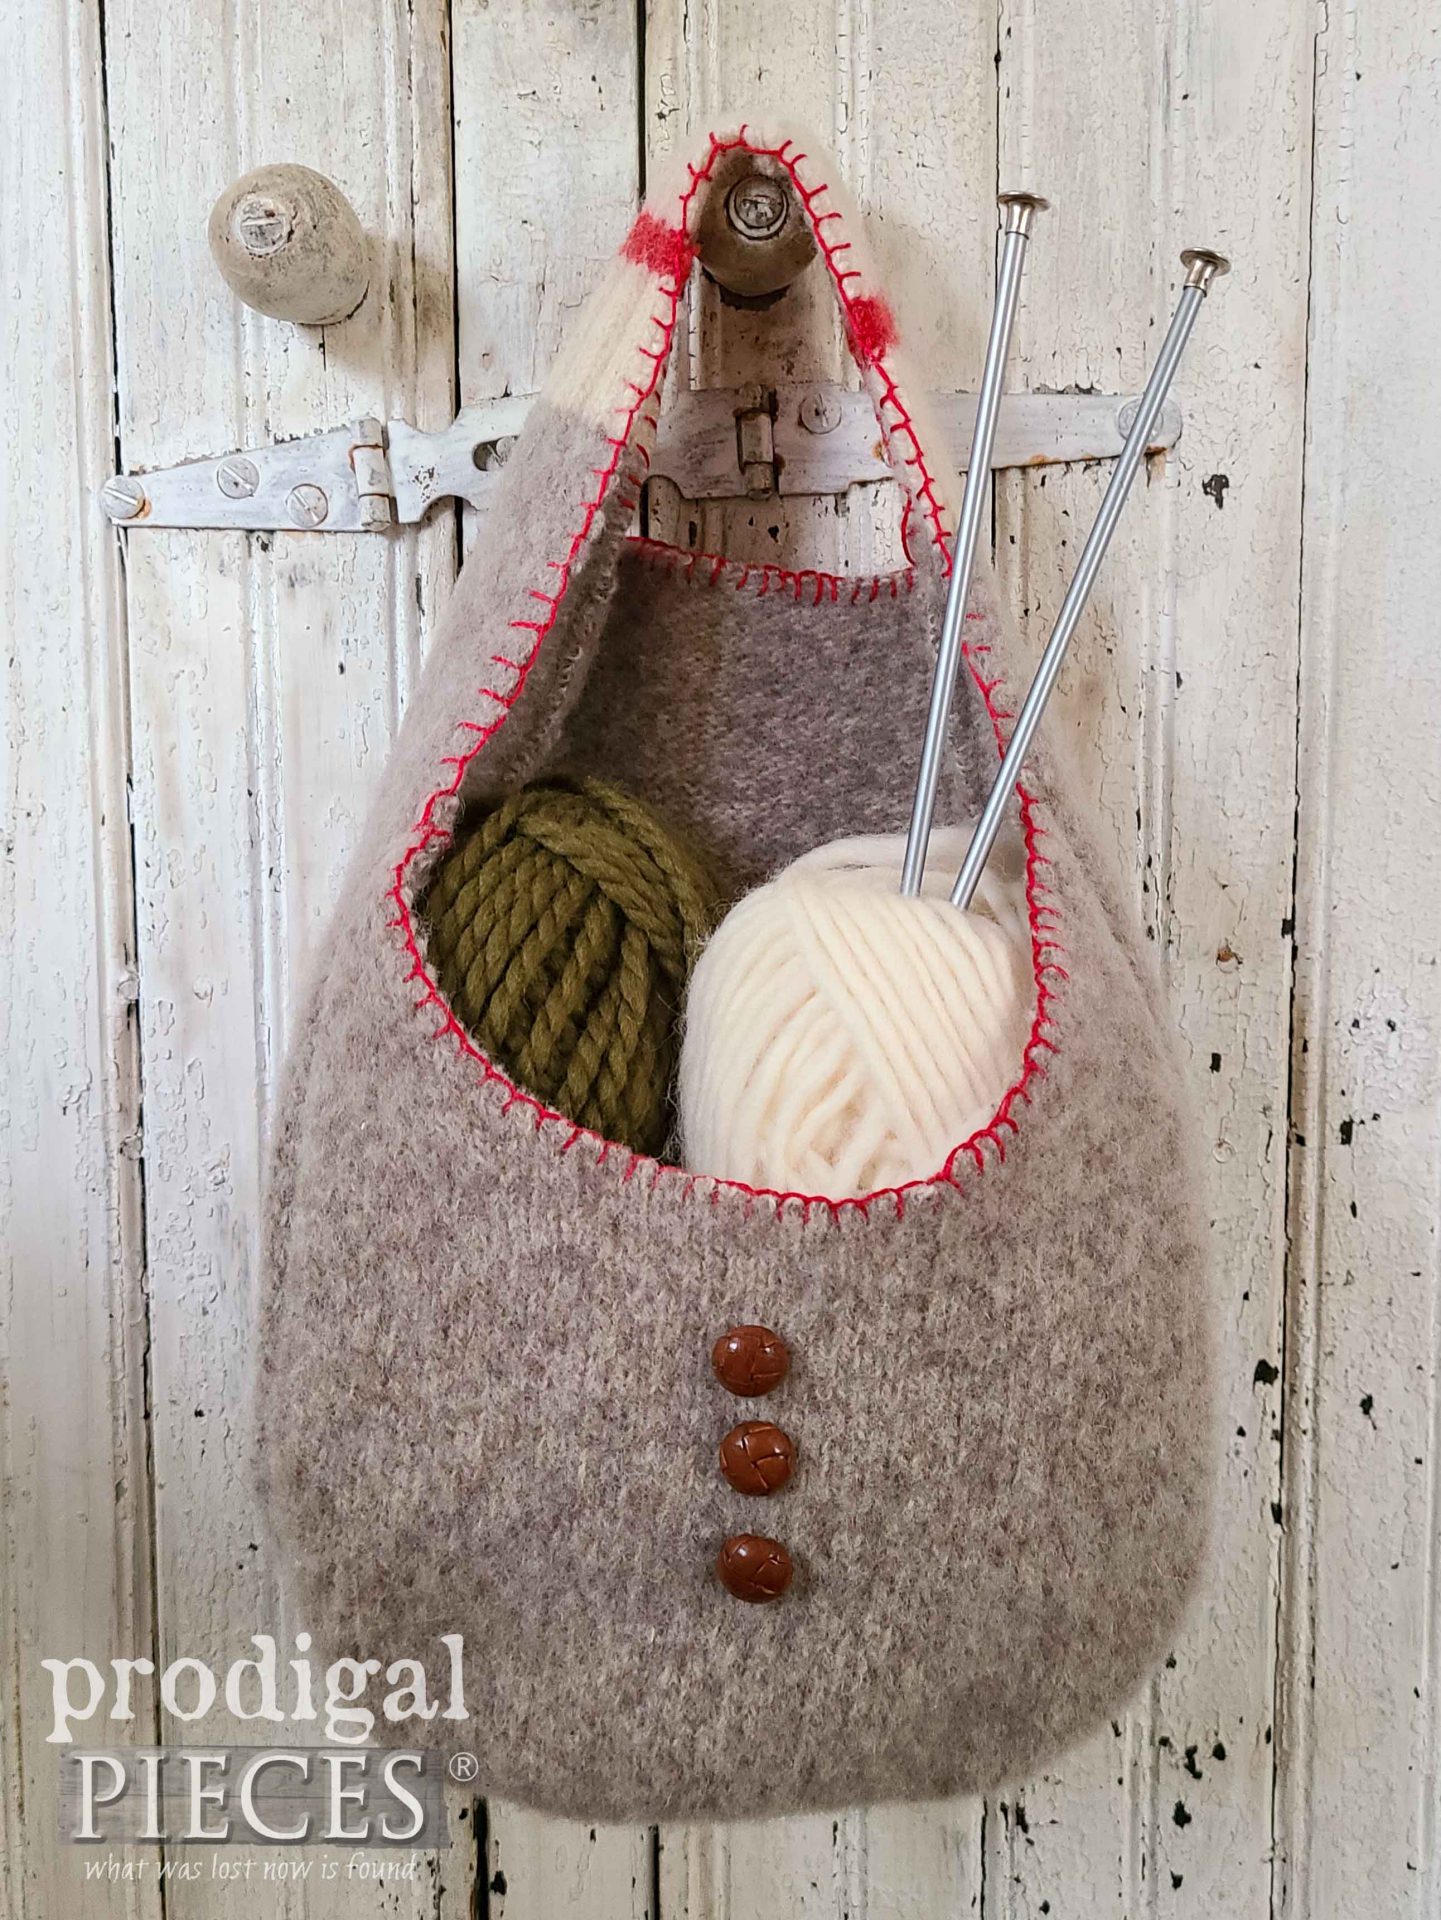 Felted Brown Wool Basket with Red Trim from Upcycled Dress by Larissa of Prodigal Pieces | prodigalpieces.com #prodigalpieces #diy #refashion #sewing #giftidea #christmas